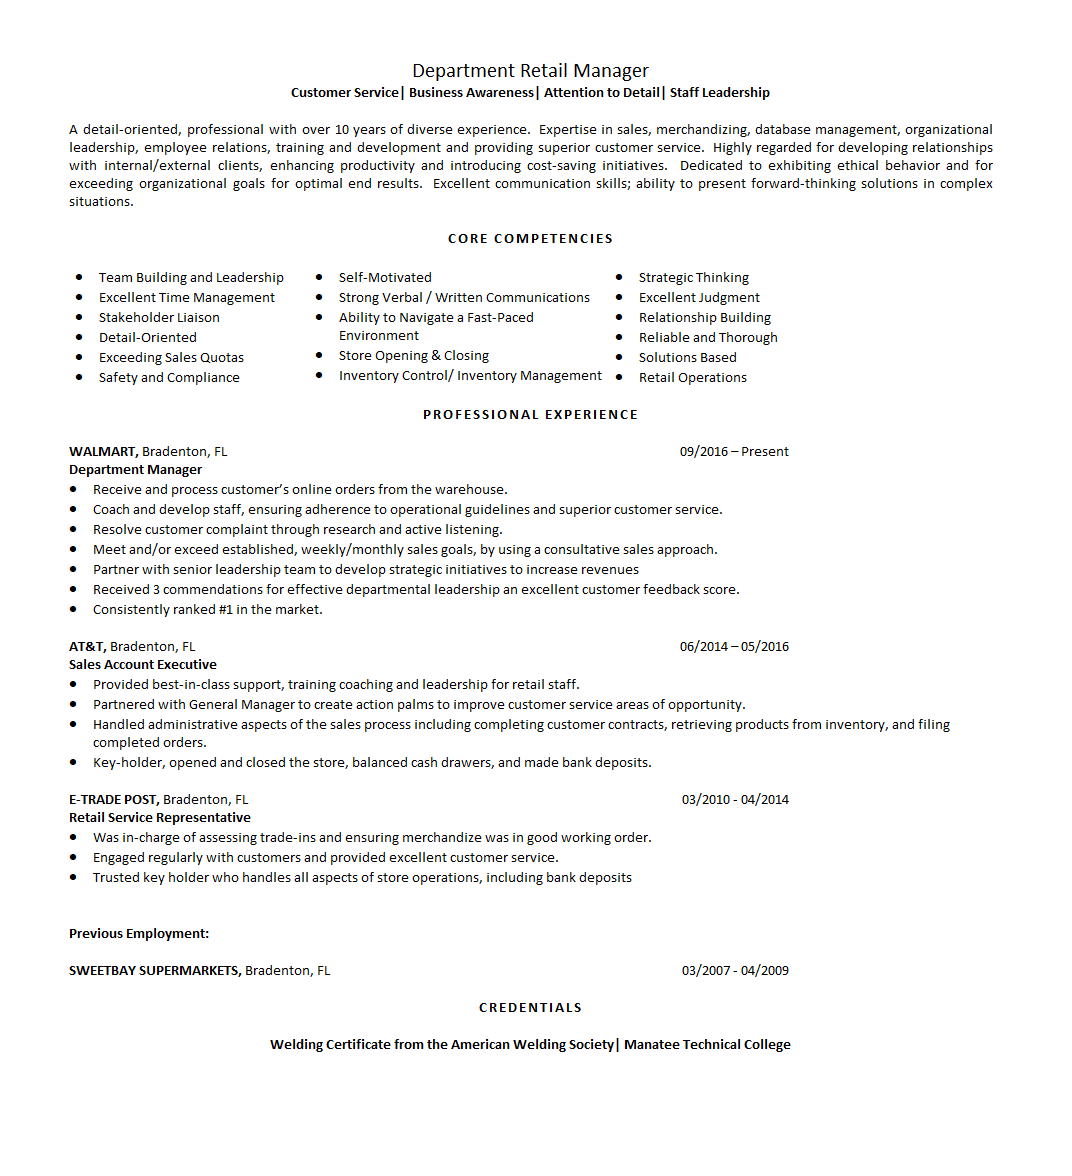 Need some critique on my resume. What does everyone think ...